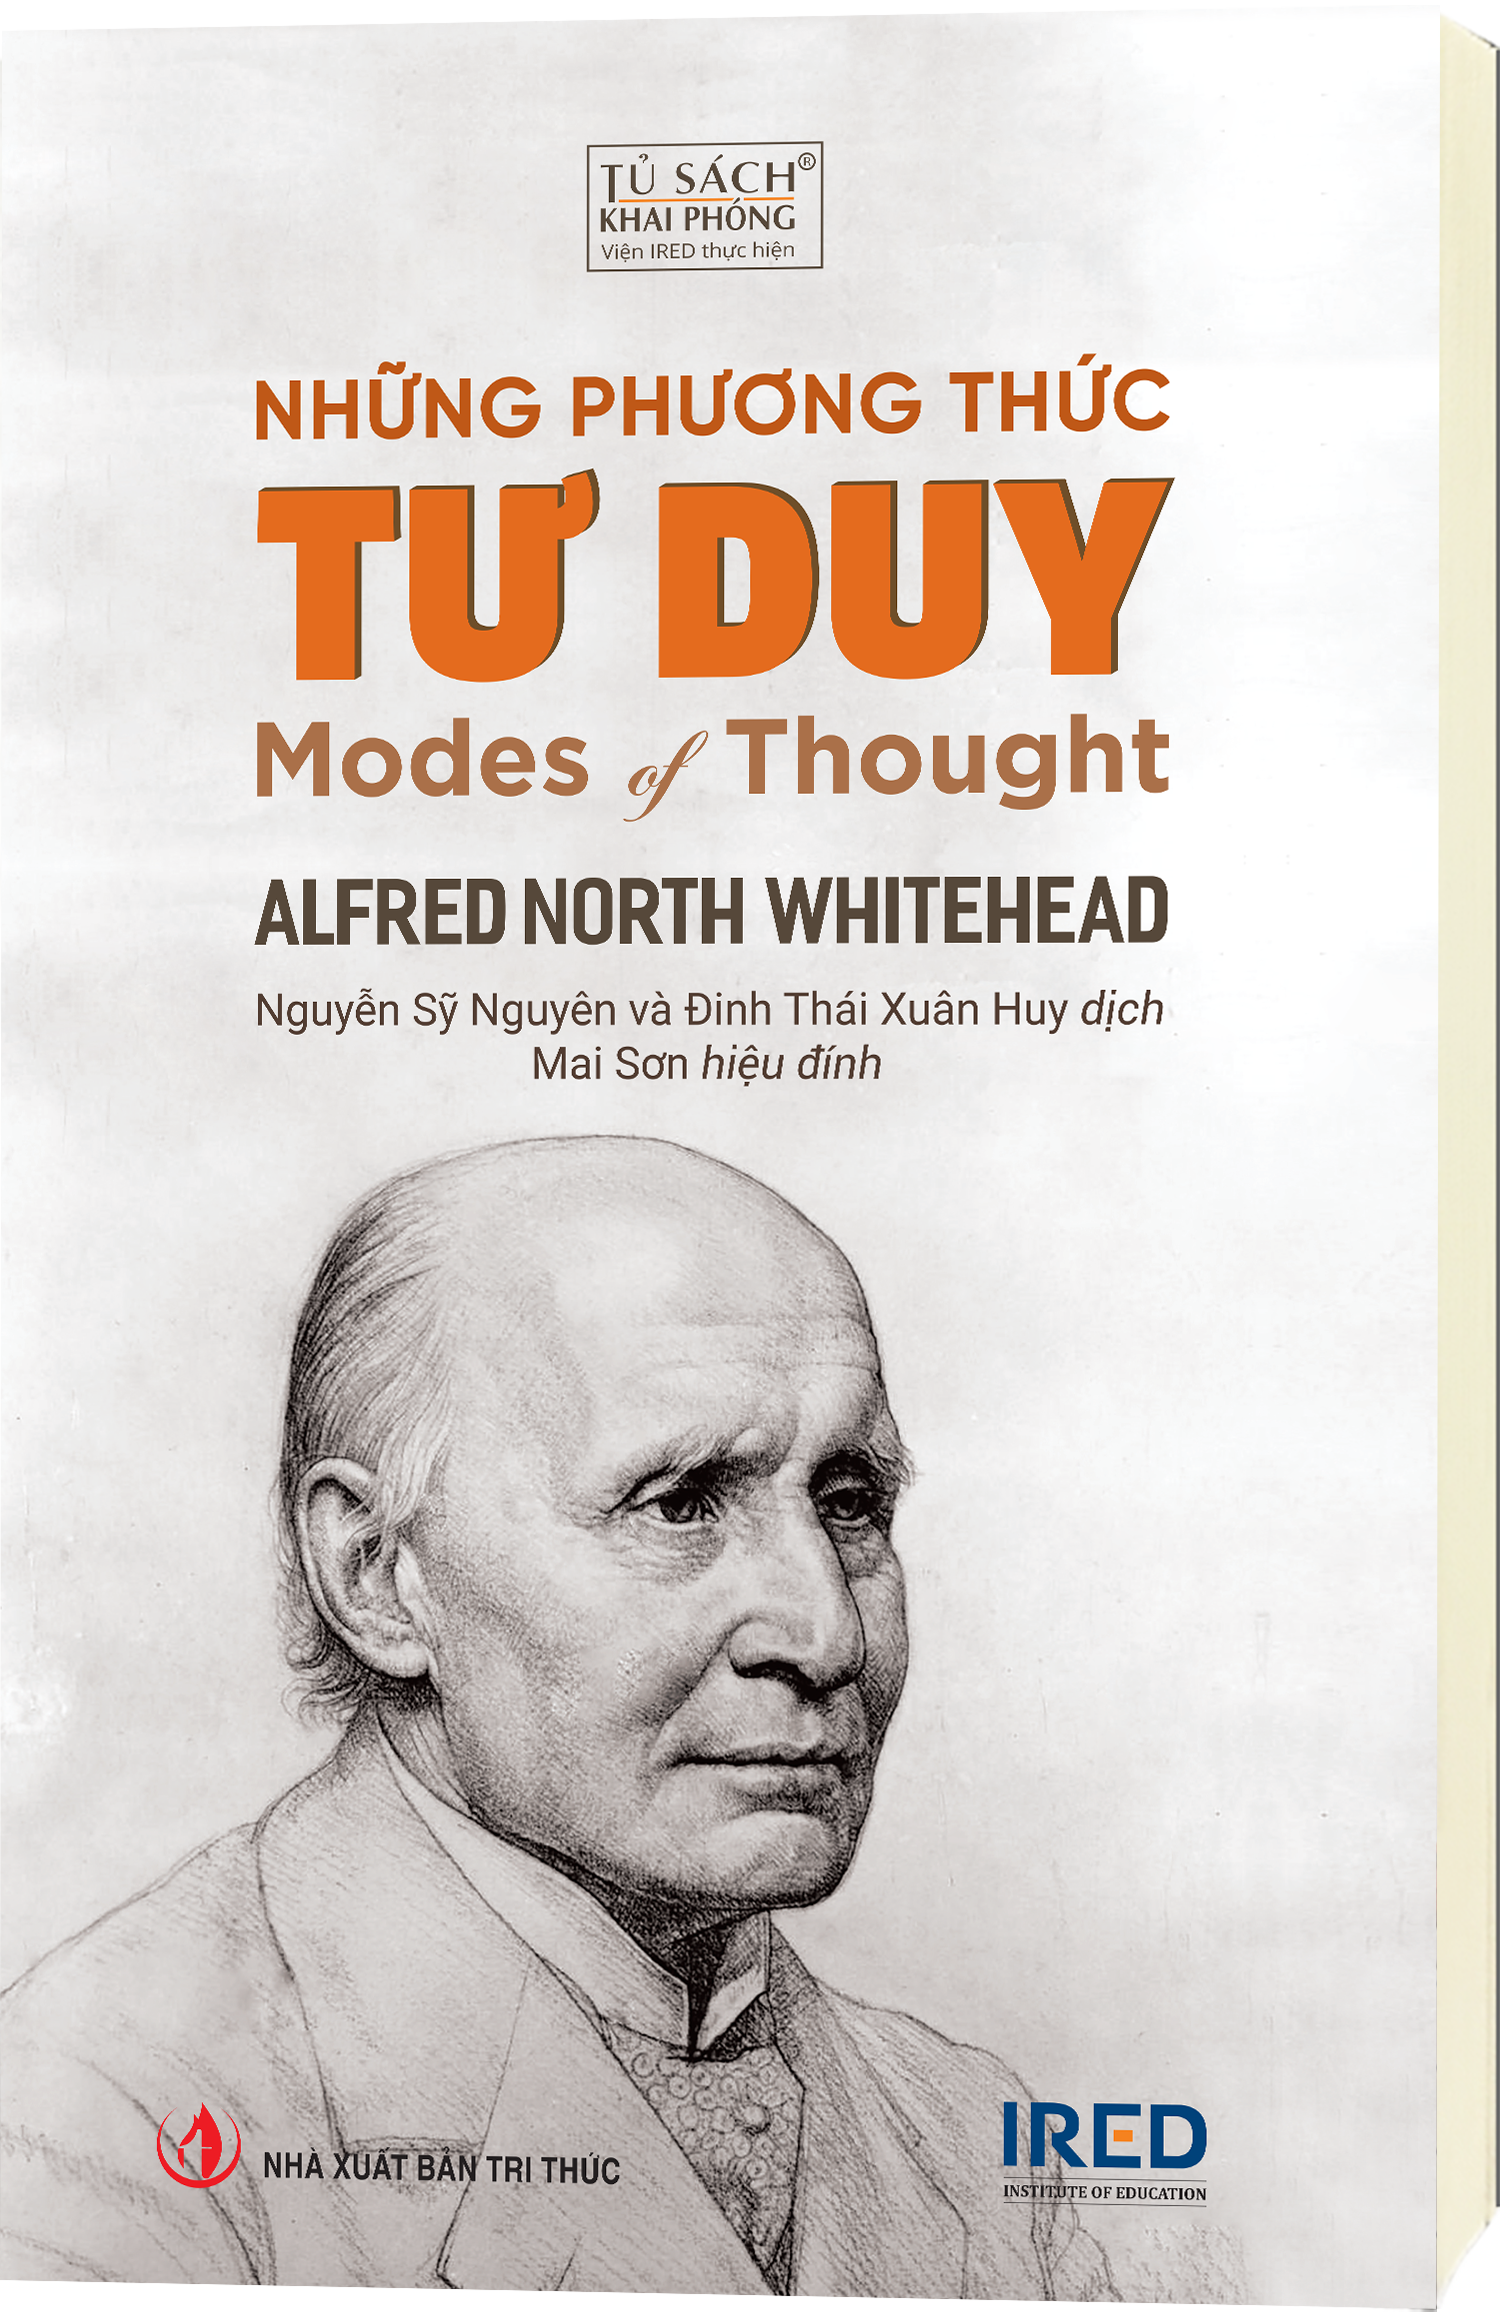 Sách IRED Books - Những phương thức tư duy (Modes of Thought) - Alfred North Whitehead